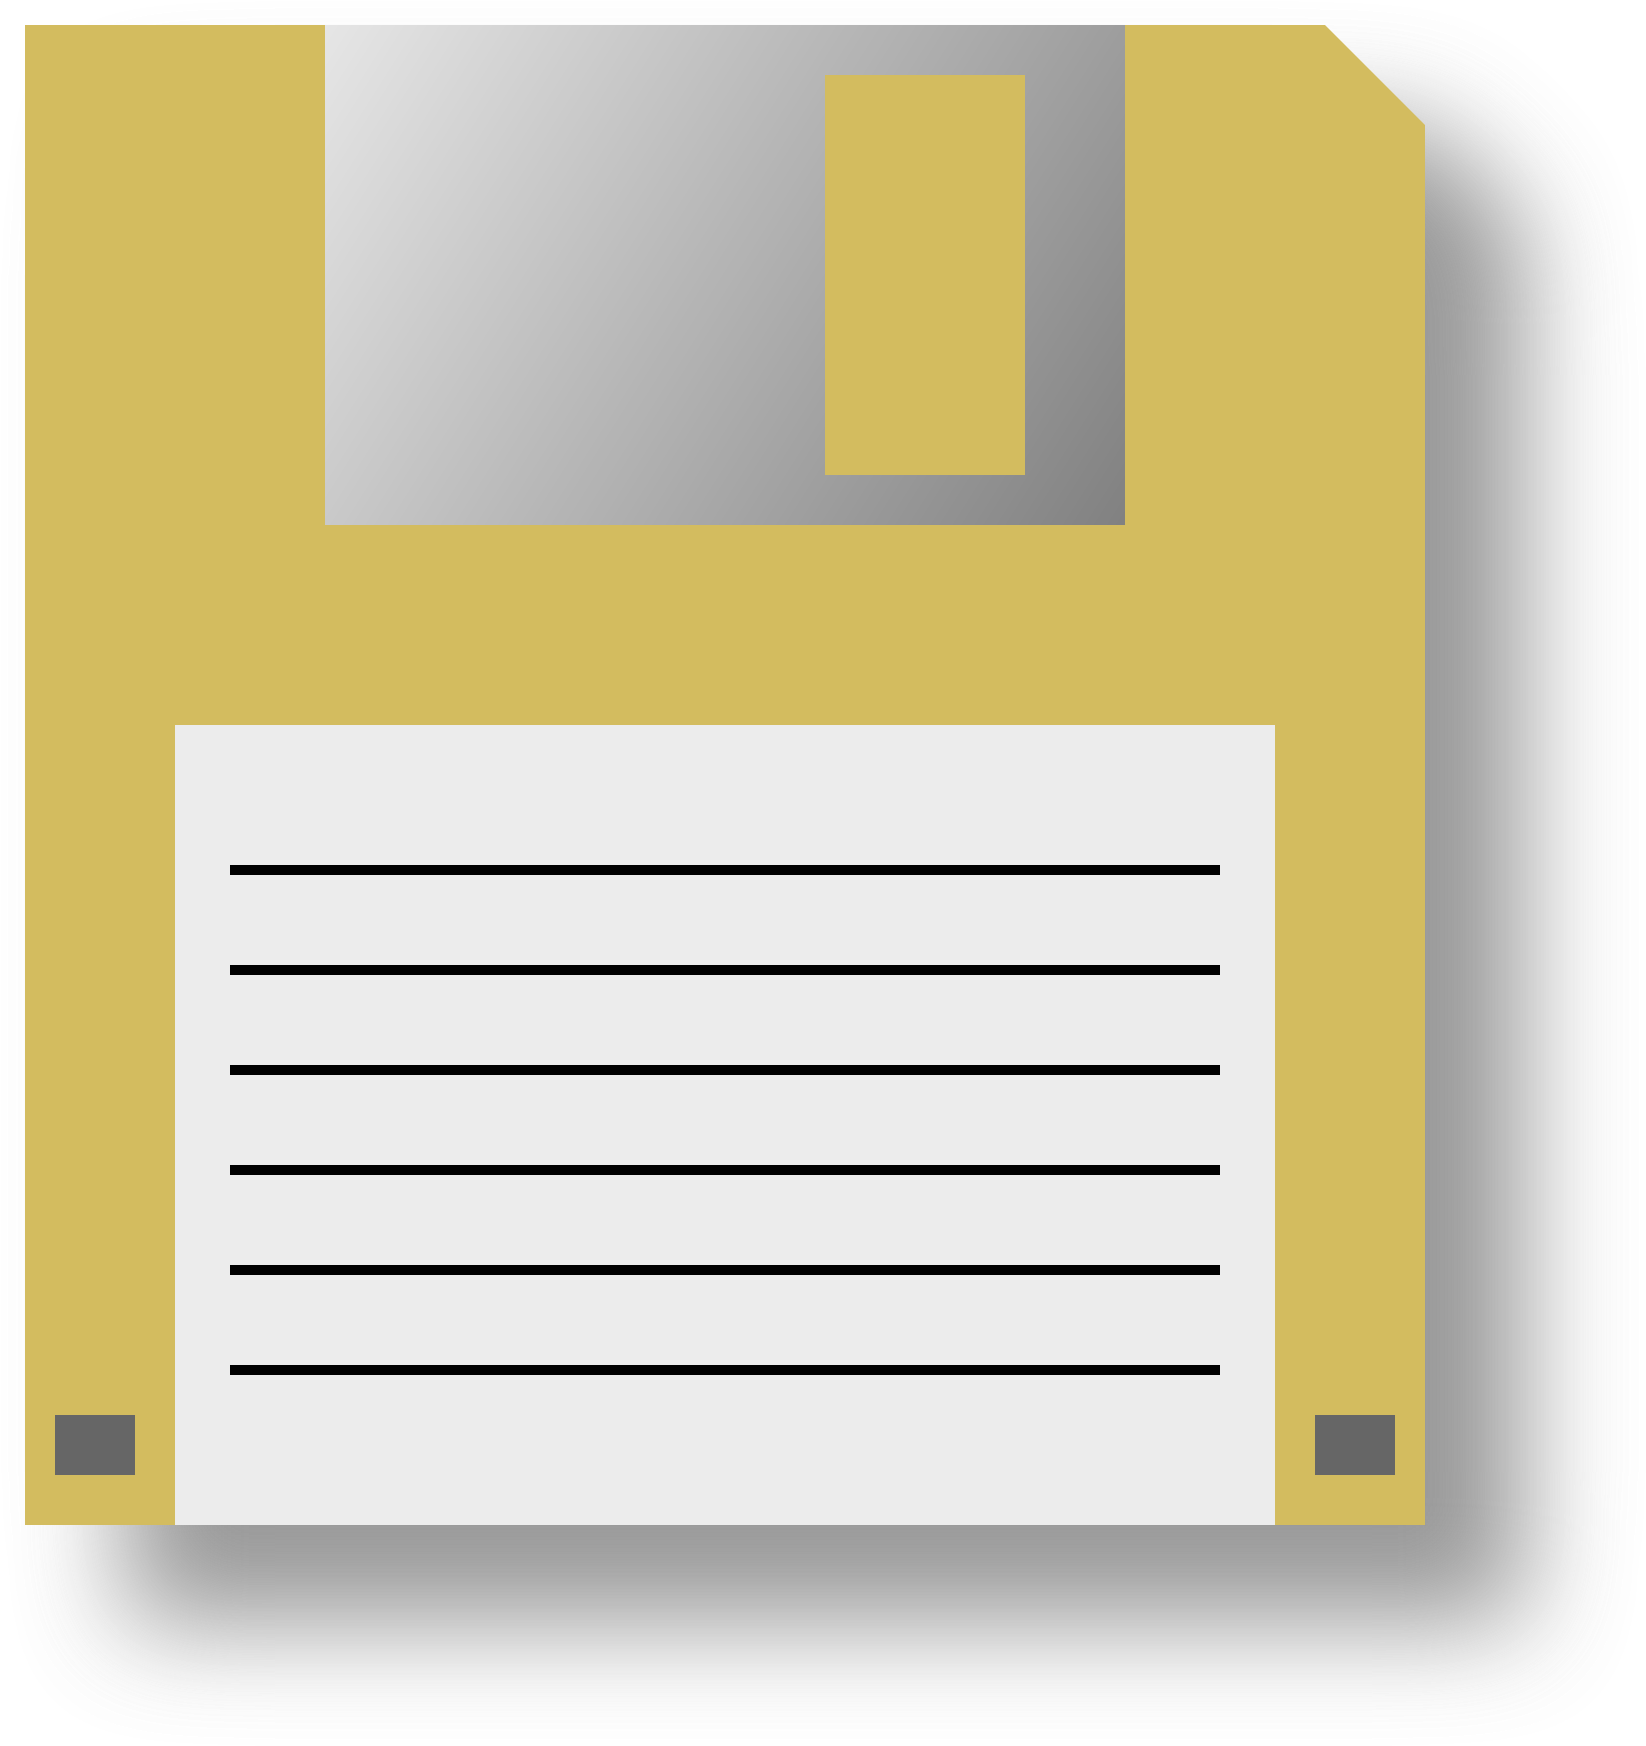 Front Floppy Disk Photos Free Transparent Image HQ PNG Image